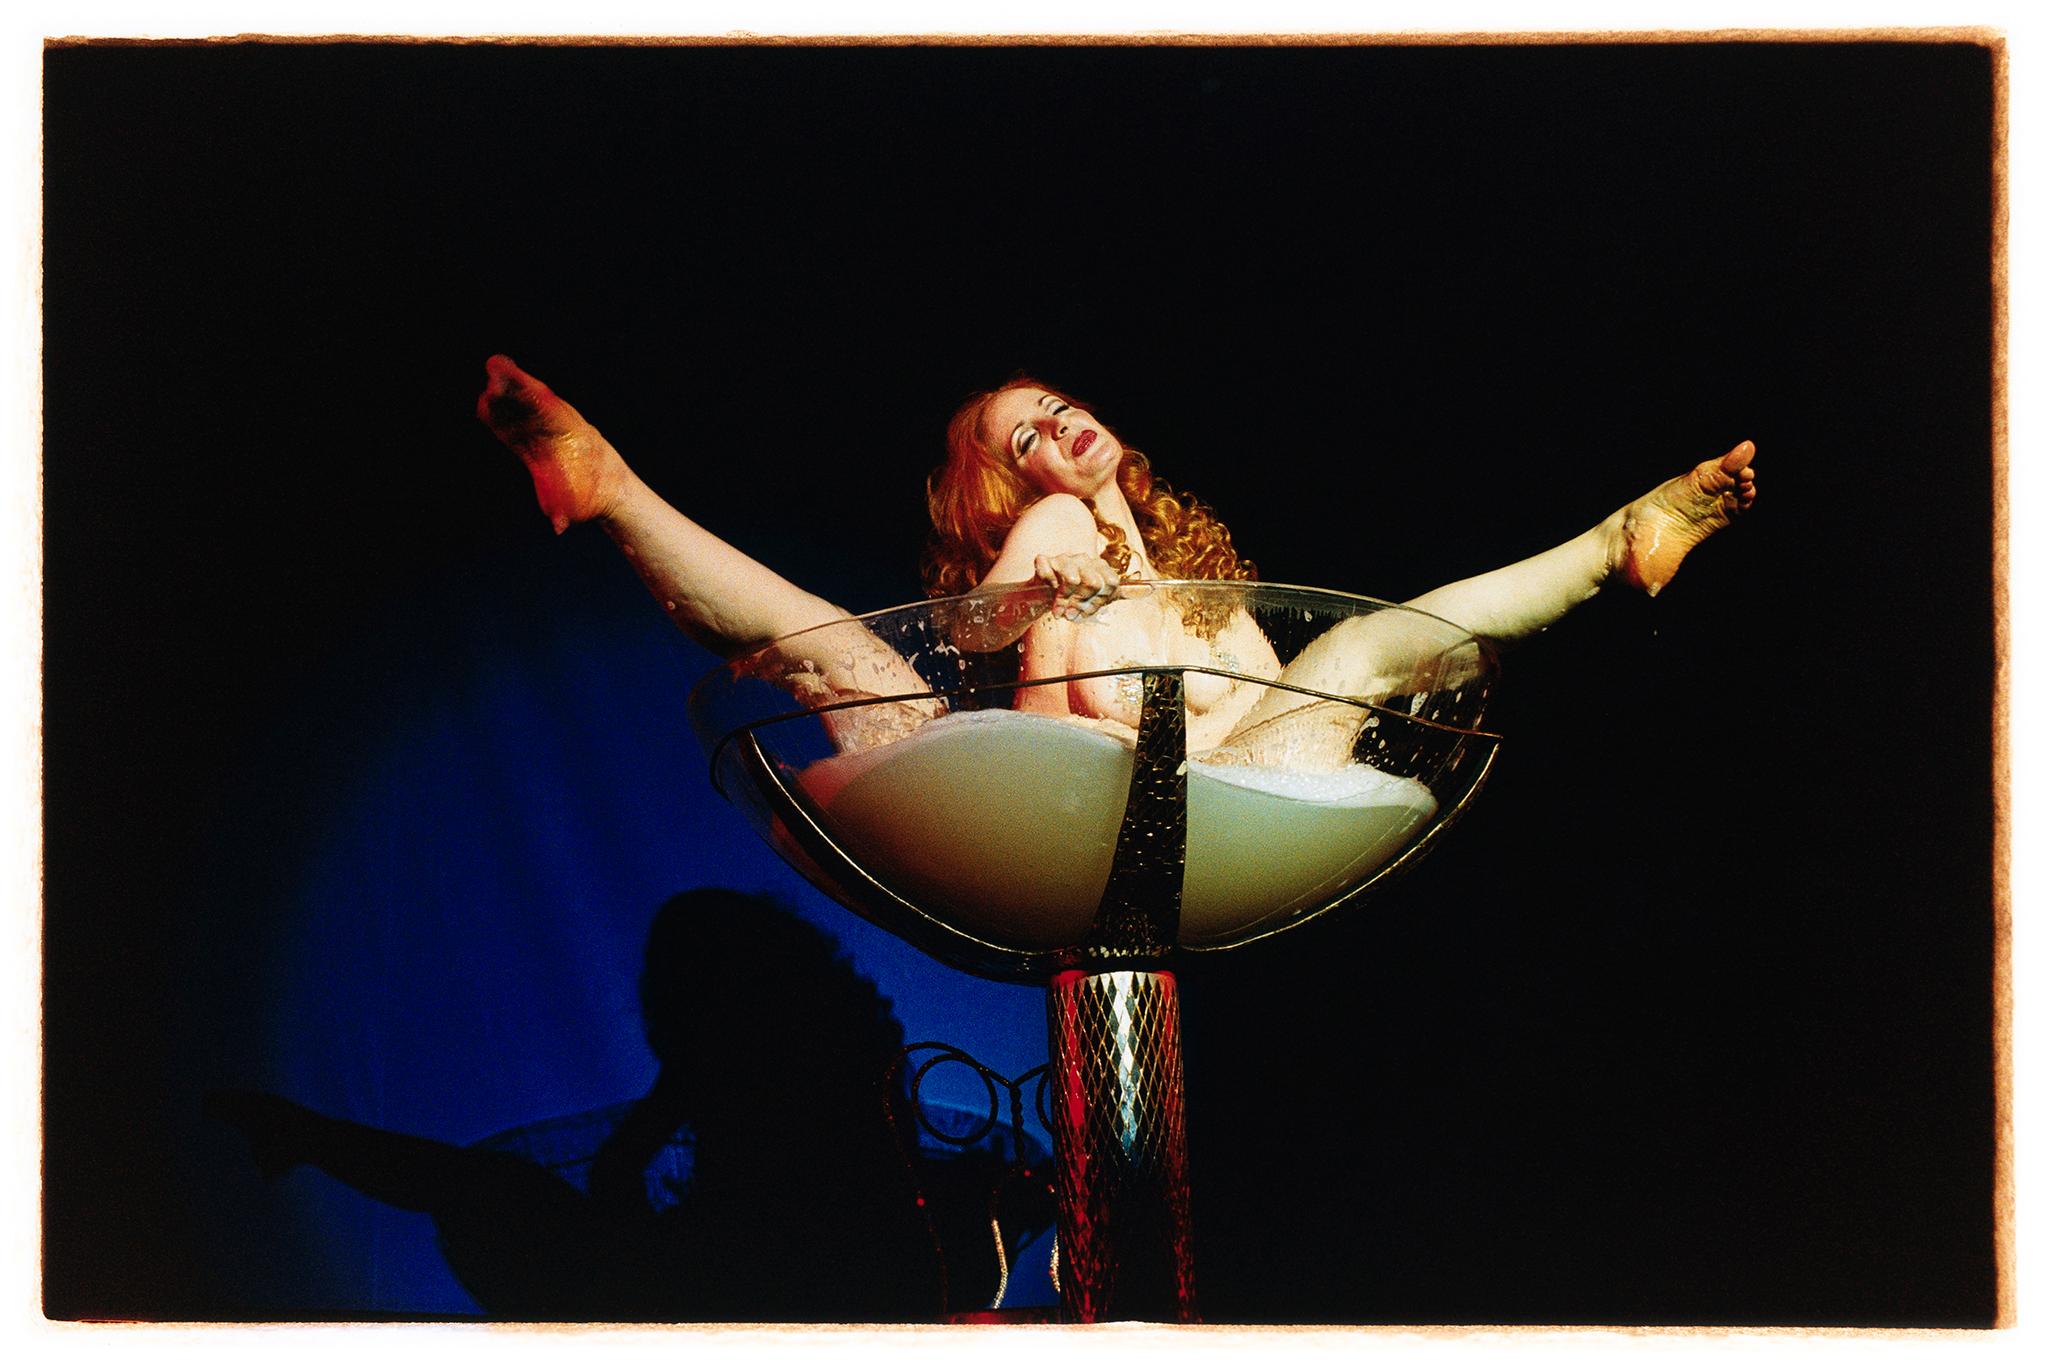 Catherine D'Lish, Tease-o-Rama, photograph capturing her champagne coupe Burlesque performance in Hollywood. Richard Heeps became well-known for his Burlesque photography as he captured performances in Britain & America. Spending a lot time with his